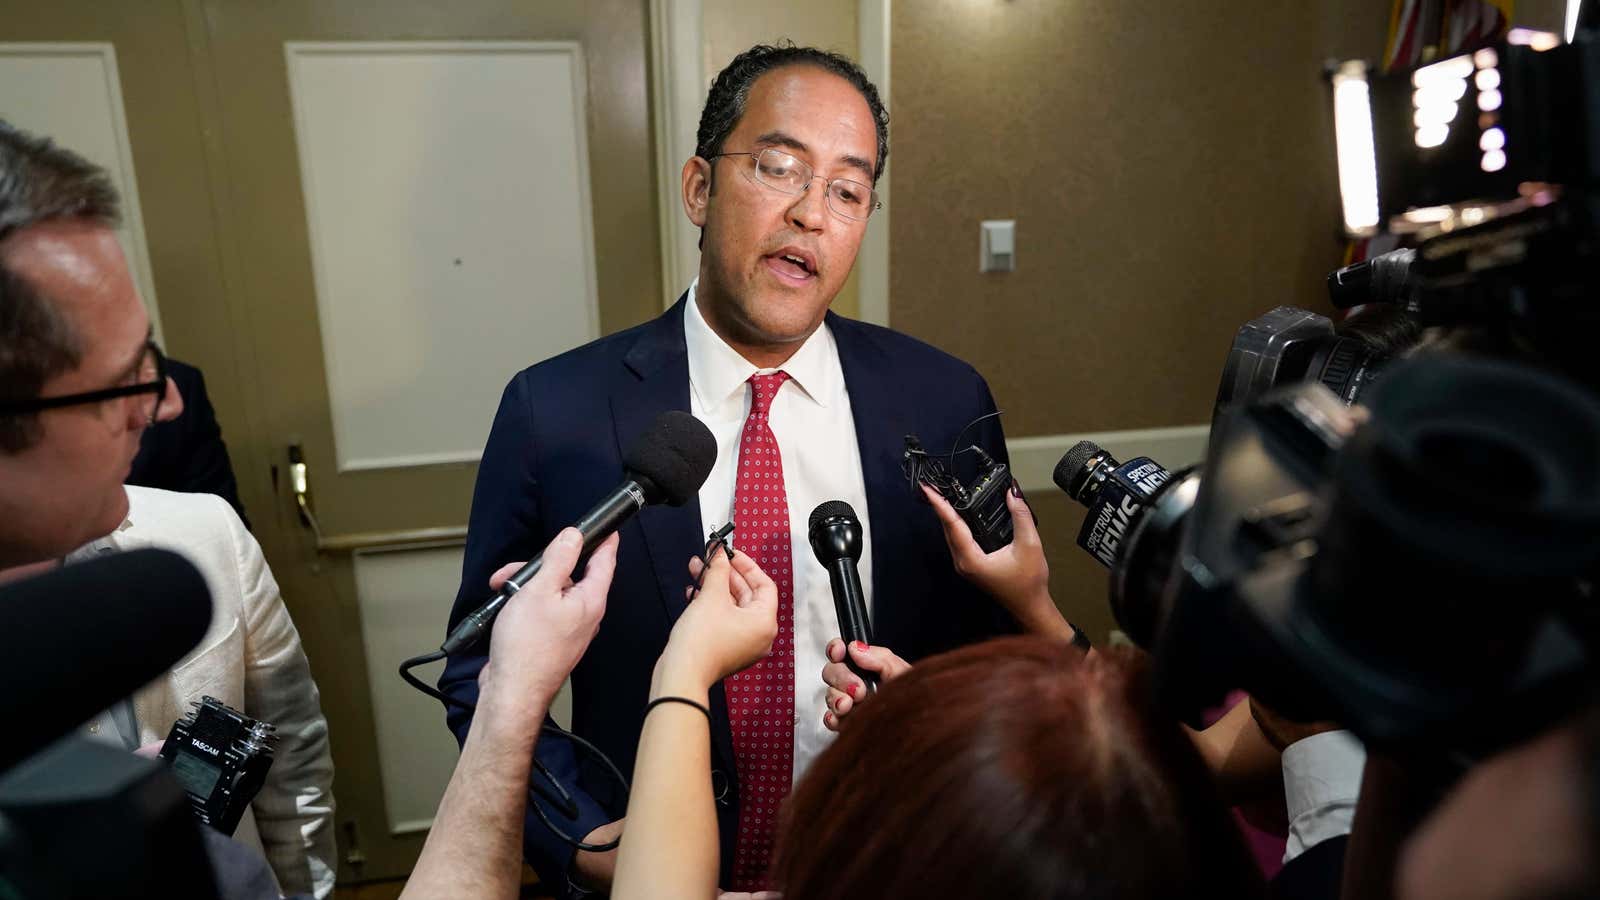 Rep. Will Hurd, a rare tech expert in Congress, is in a nail-biting finish to his Texas race.